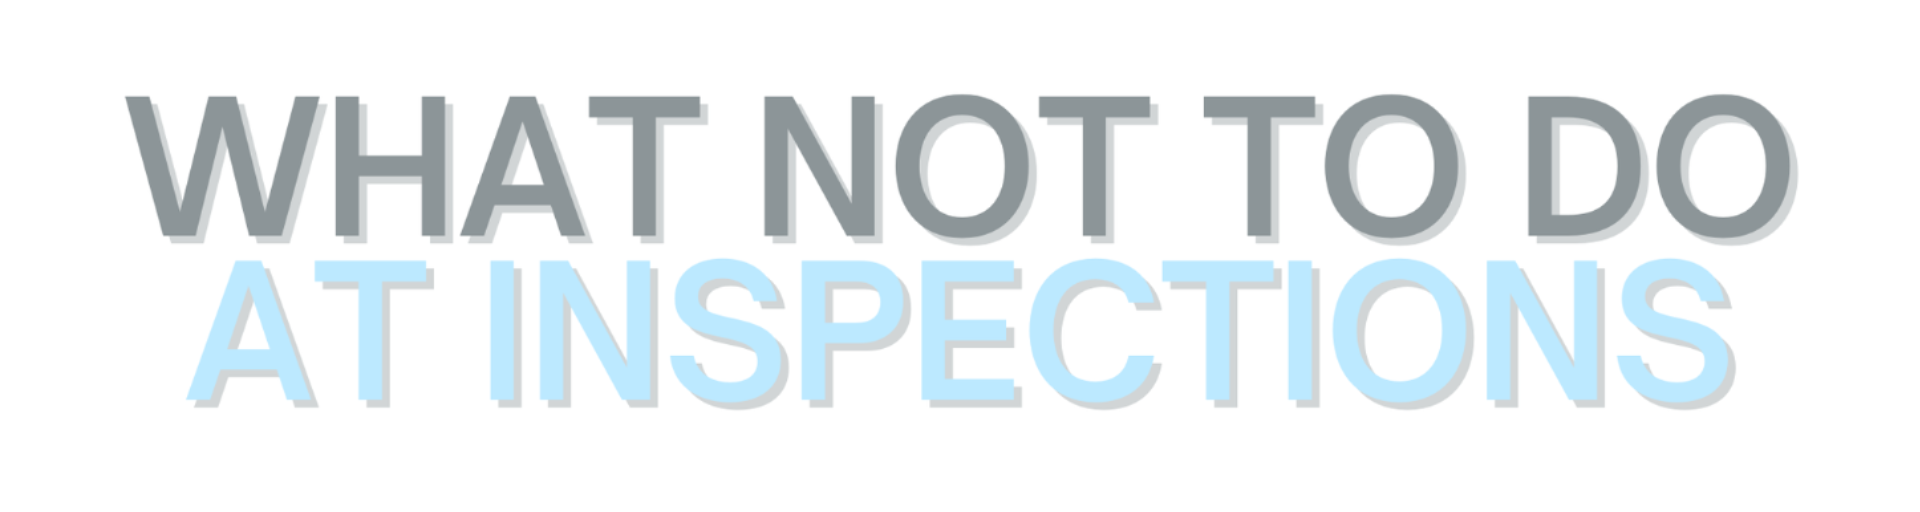 What not to do at inspections